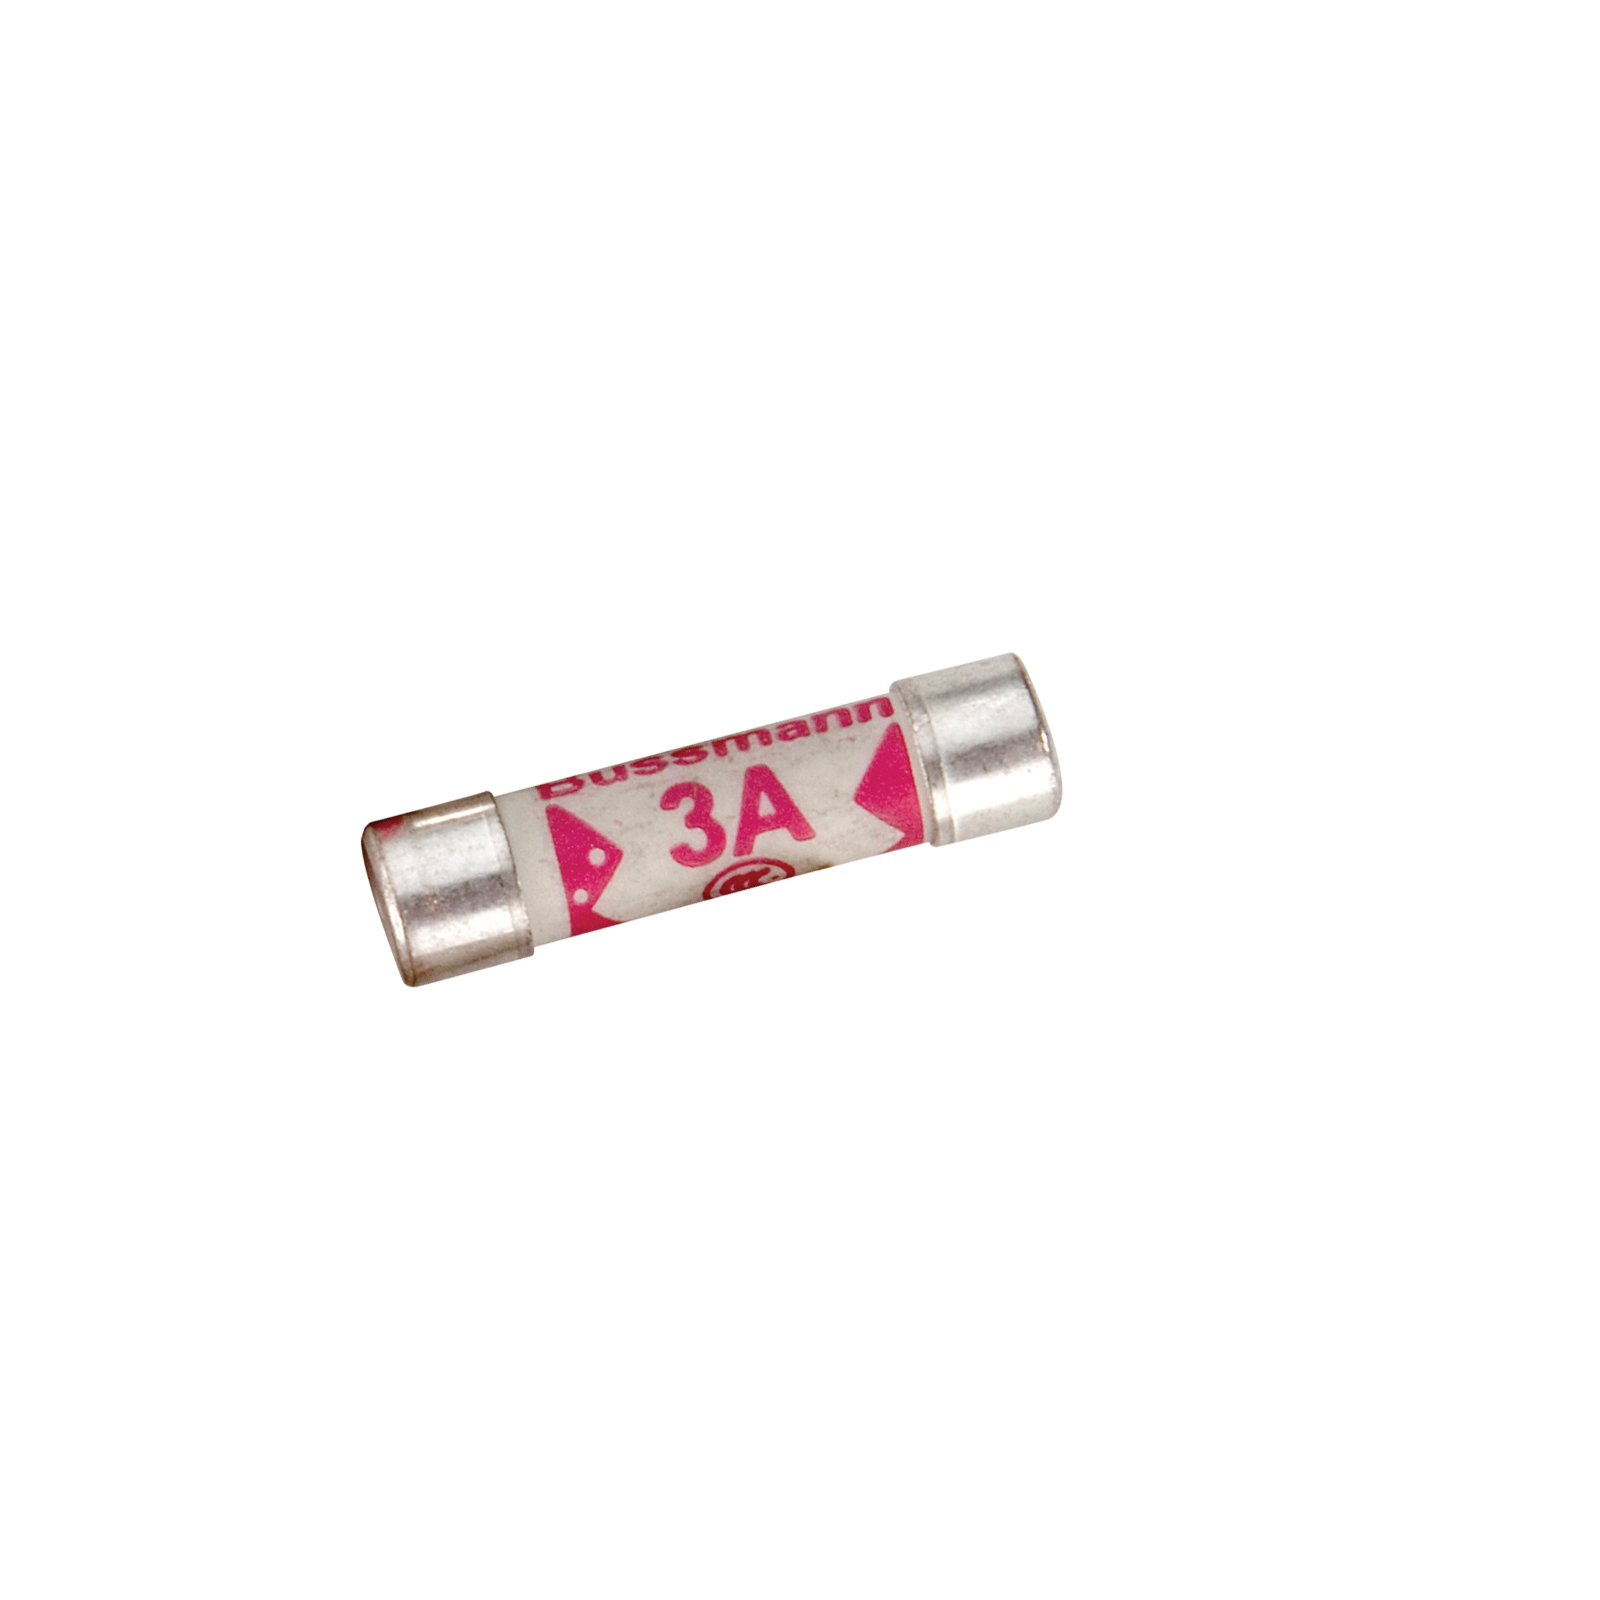 3A Plug Top Fuse - Packed In Blisters Of 10 - 3AFUSE 